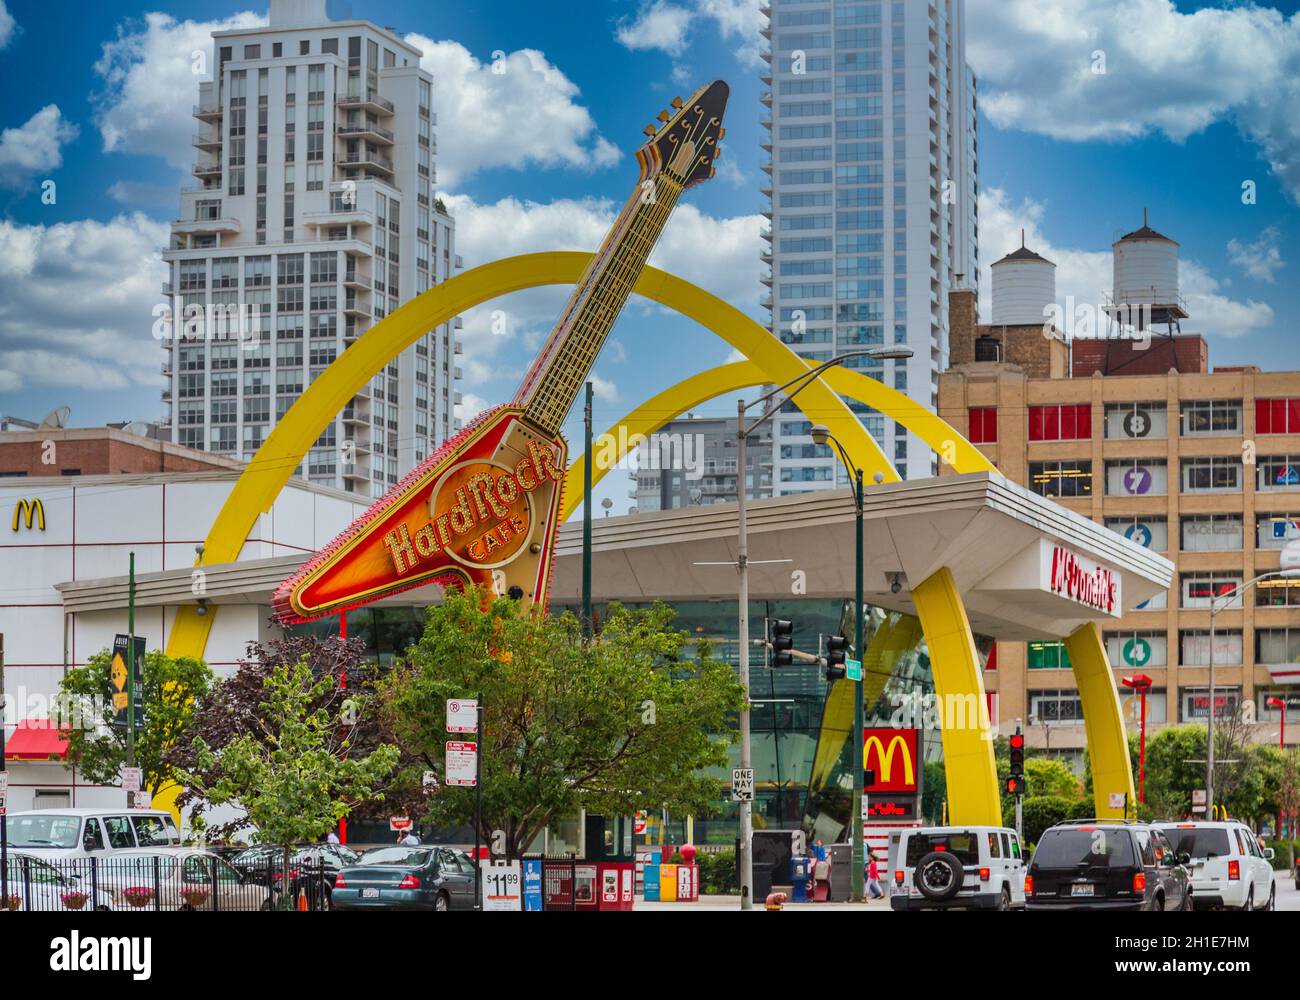 CHICAGO, ILLINOIS - June 25, 2014: Hard Rock Cafe Inc. is a chain of theme restaurants founded in 1971 by Isaac Tigrett and Peter Morton in London. Stock Photo